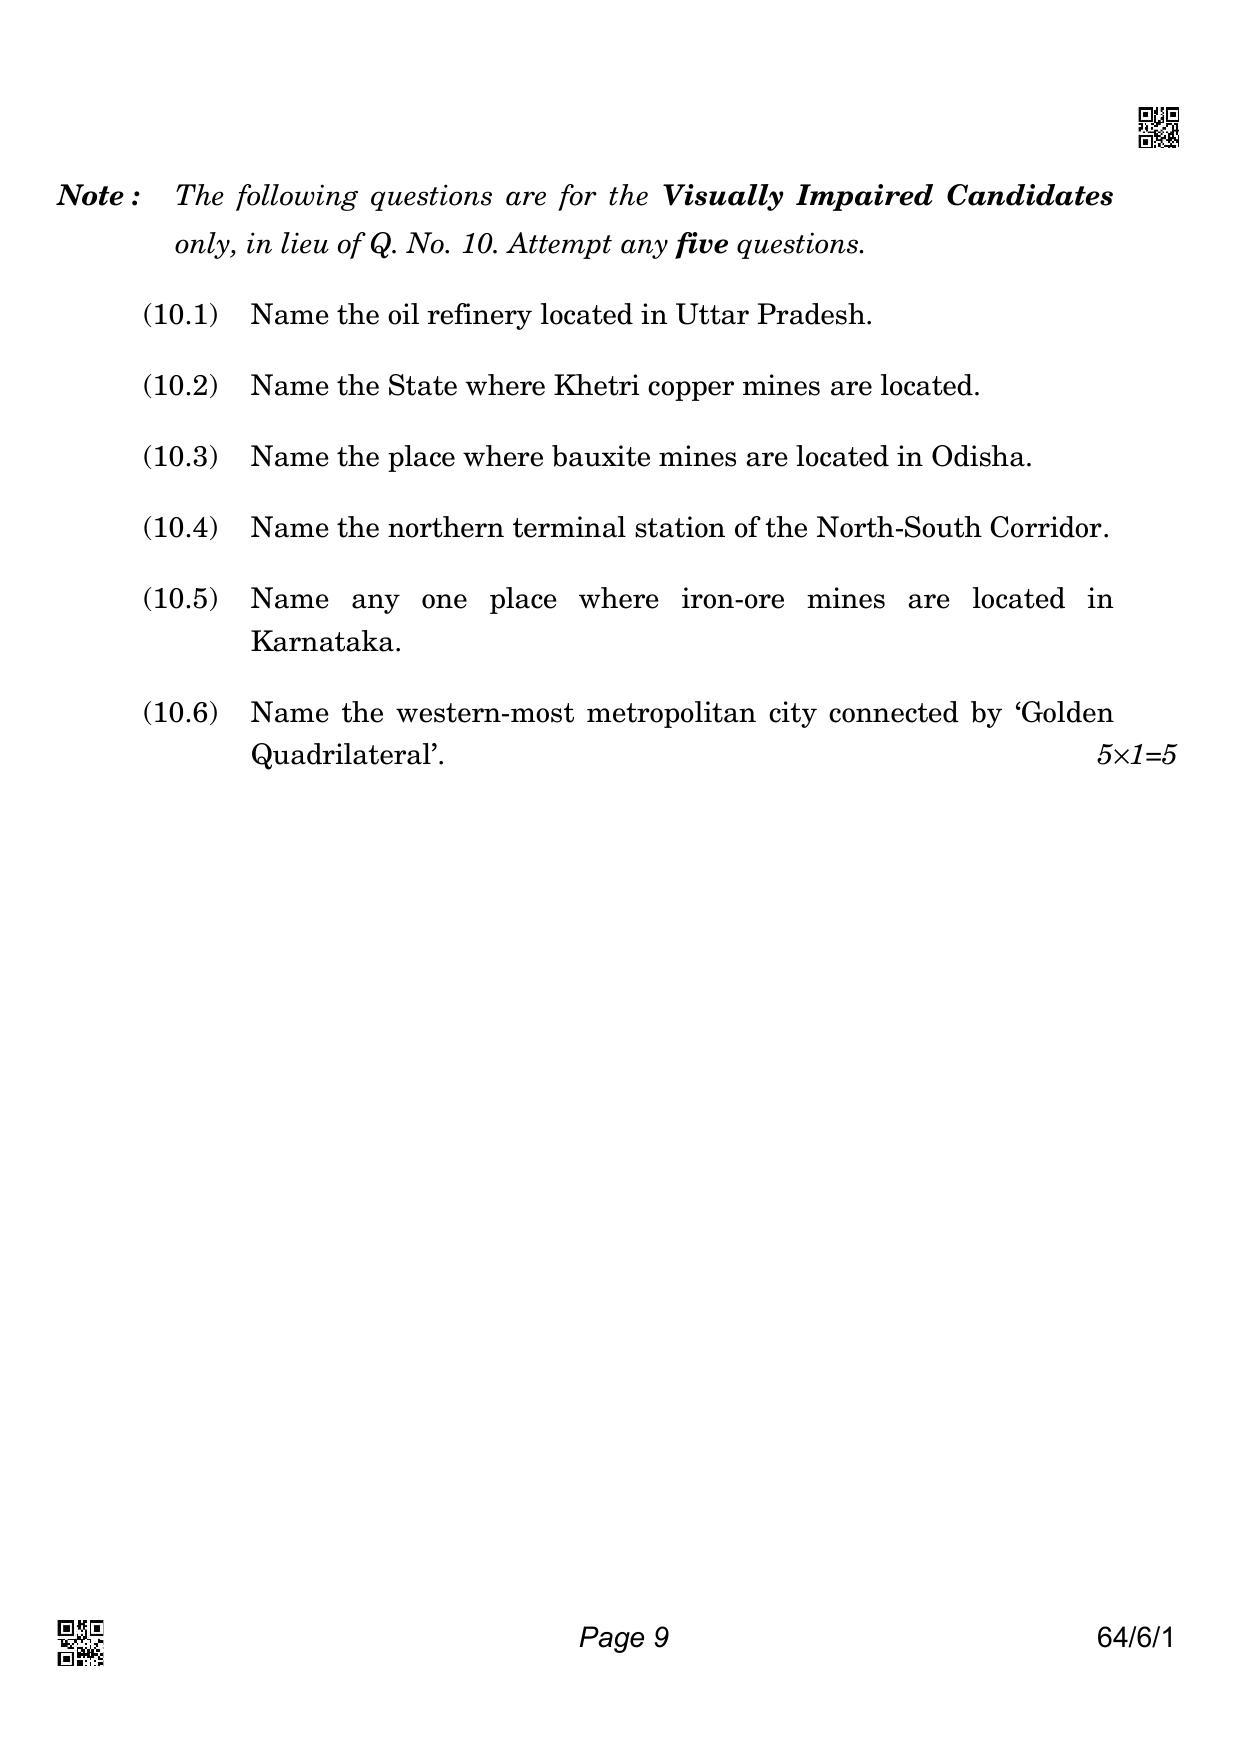 CBSE Class 12 64-6-1 GEOGRAPHY 2022 Compartment Question Paper - Page 9